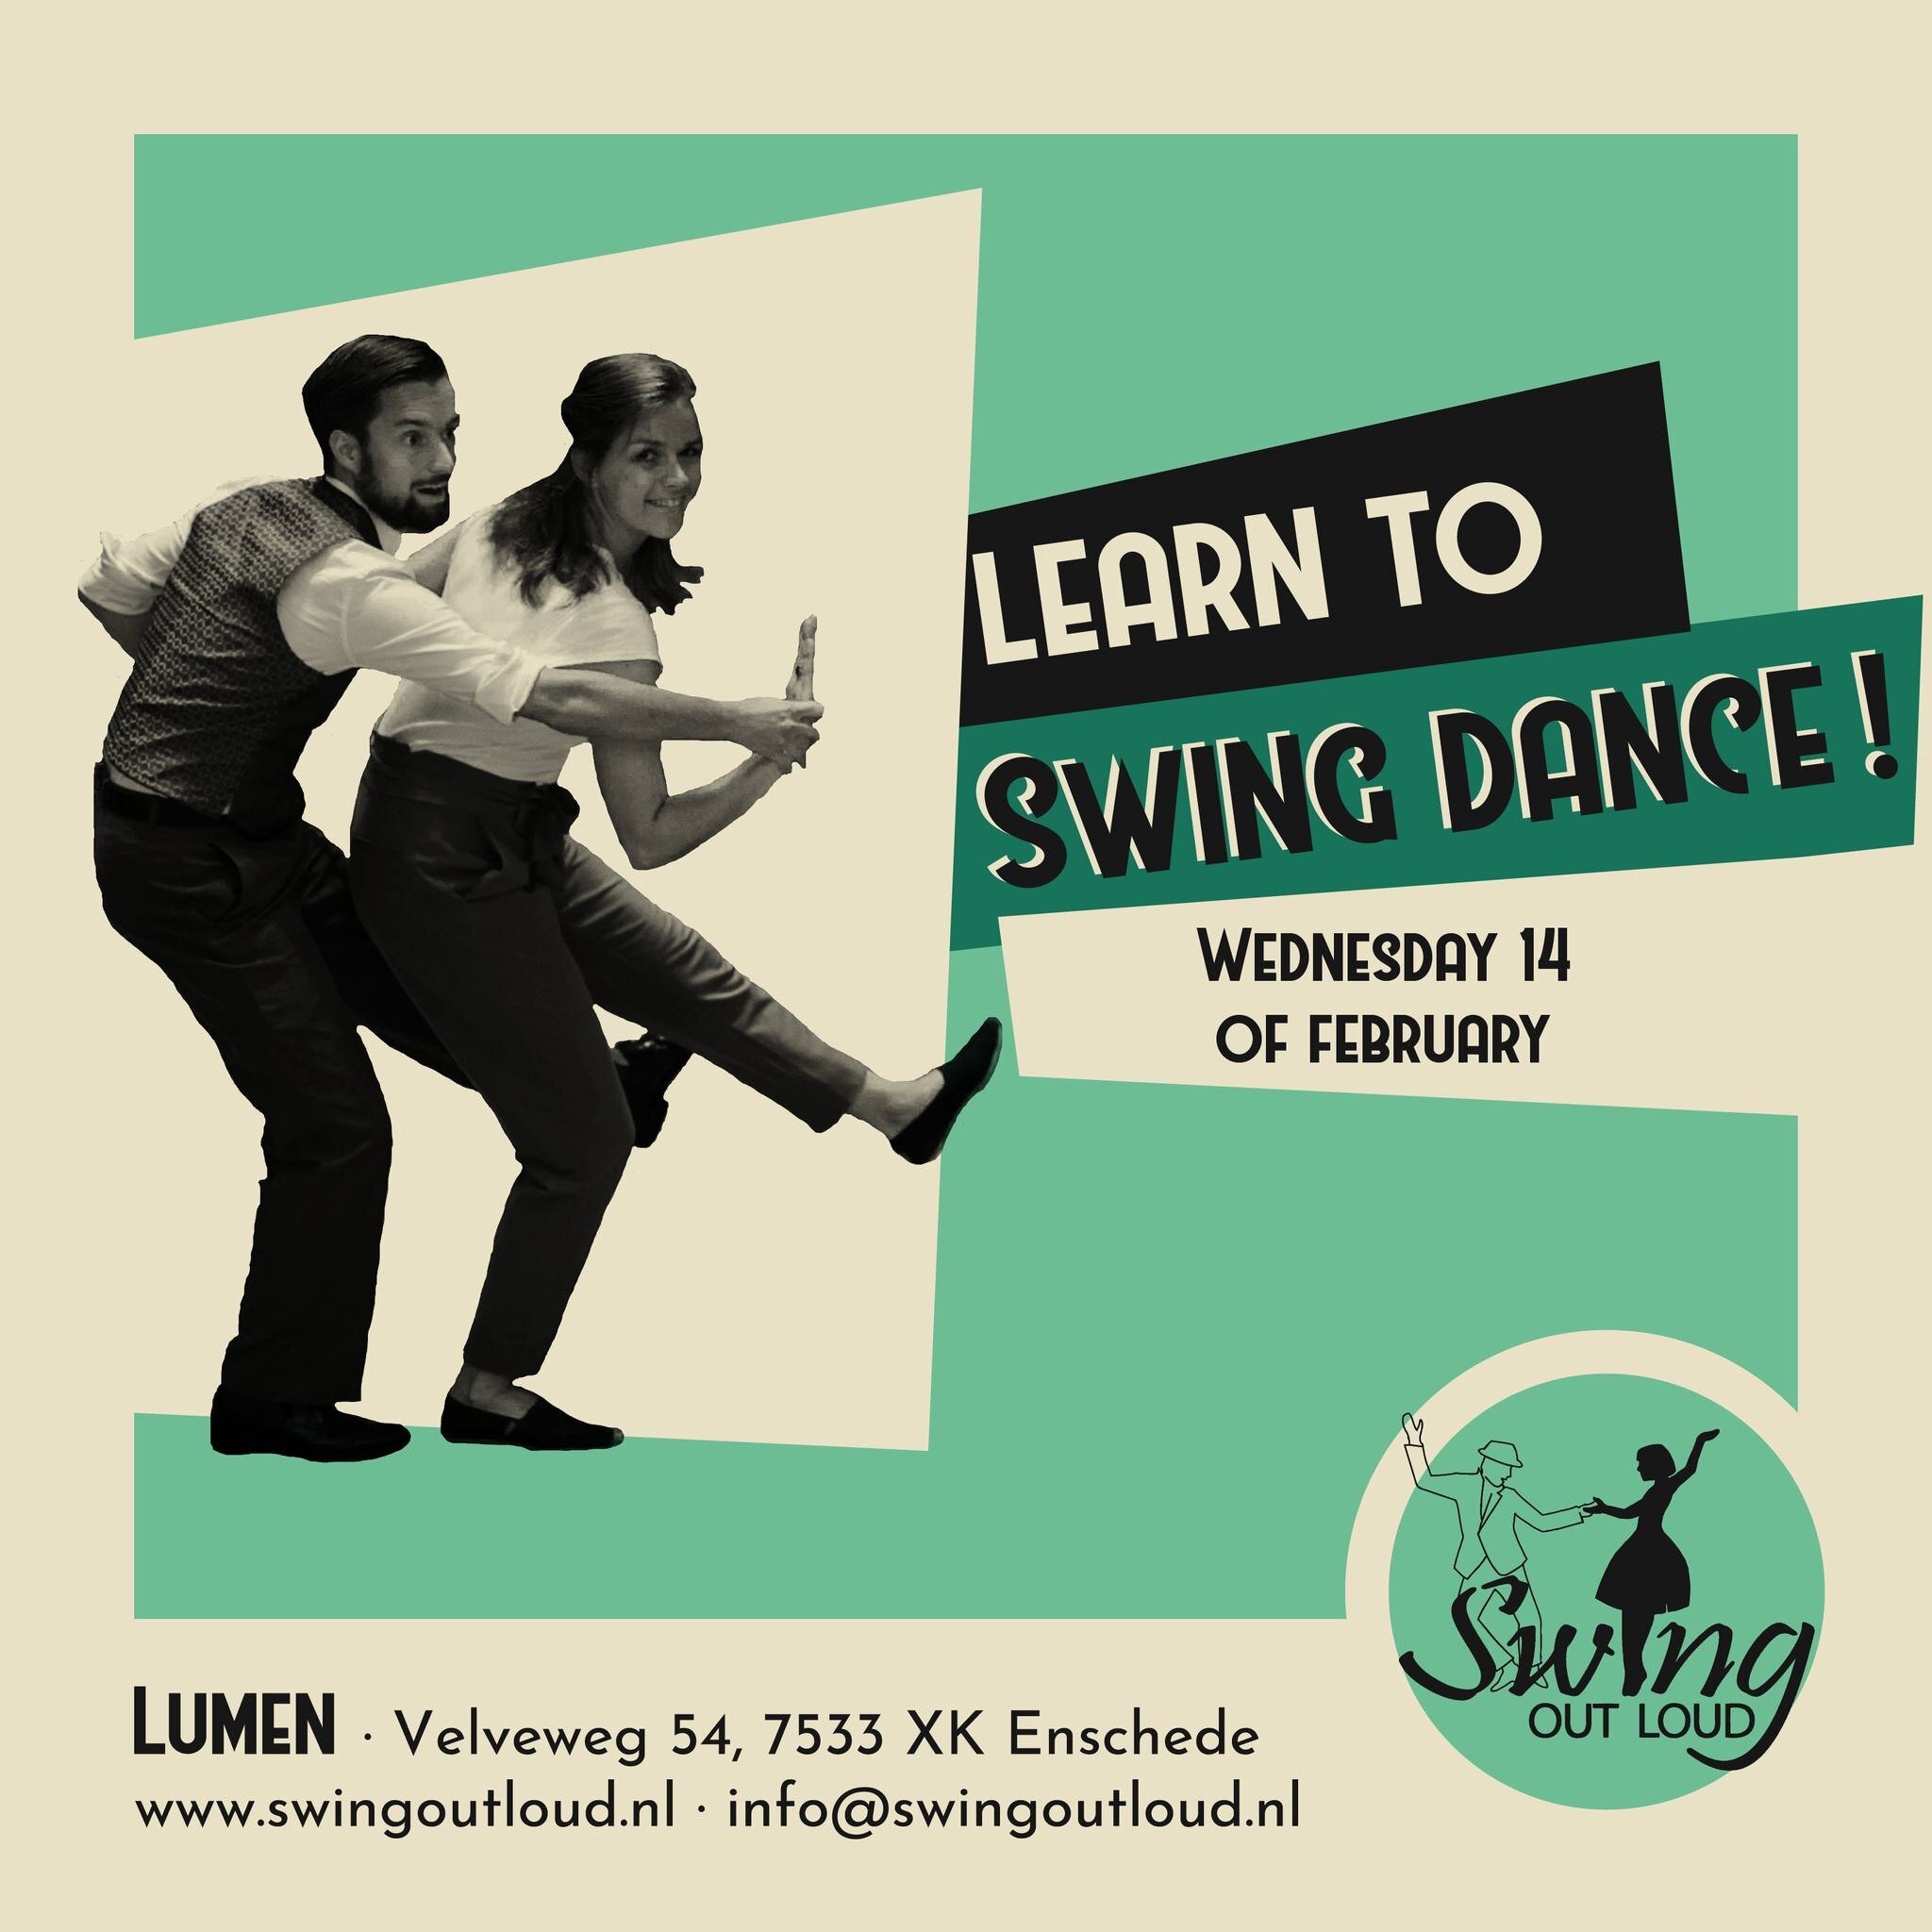 Curious about dancing swing dances like #lindyhop but not sure if it's for you? Only one way to find out: join one or more of our open lessens and/or taster classes in February! 

First open lesson is on February 14th, 19h00 at Lumen in #enschede. It